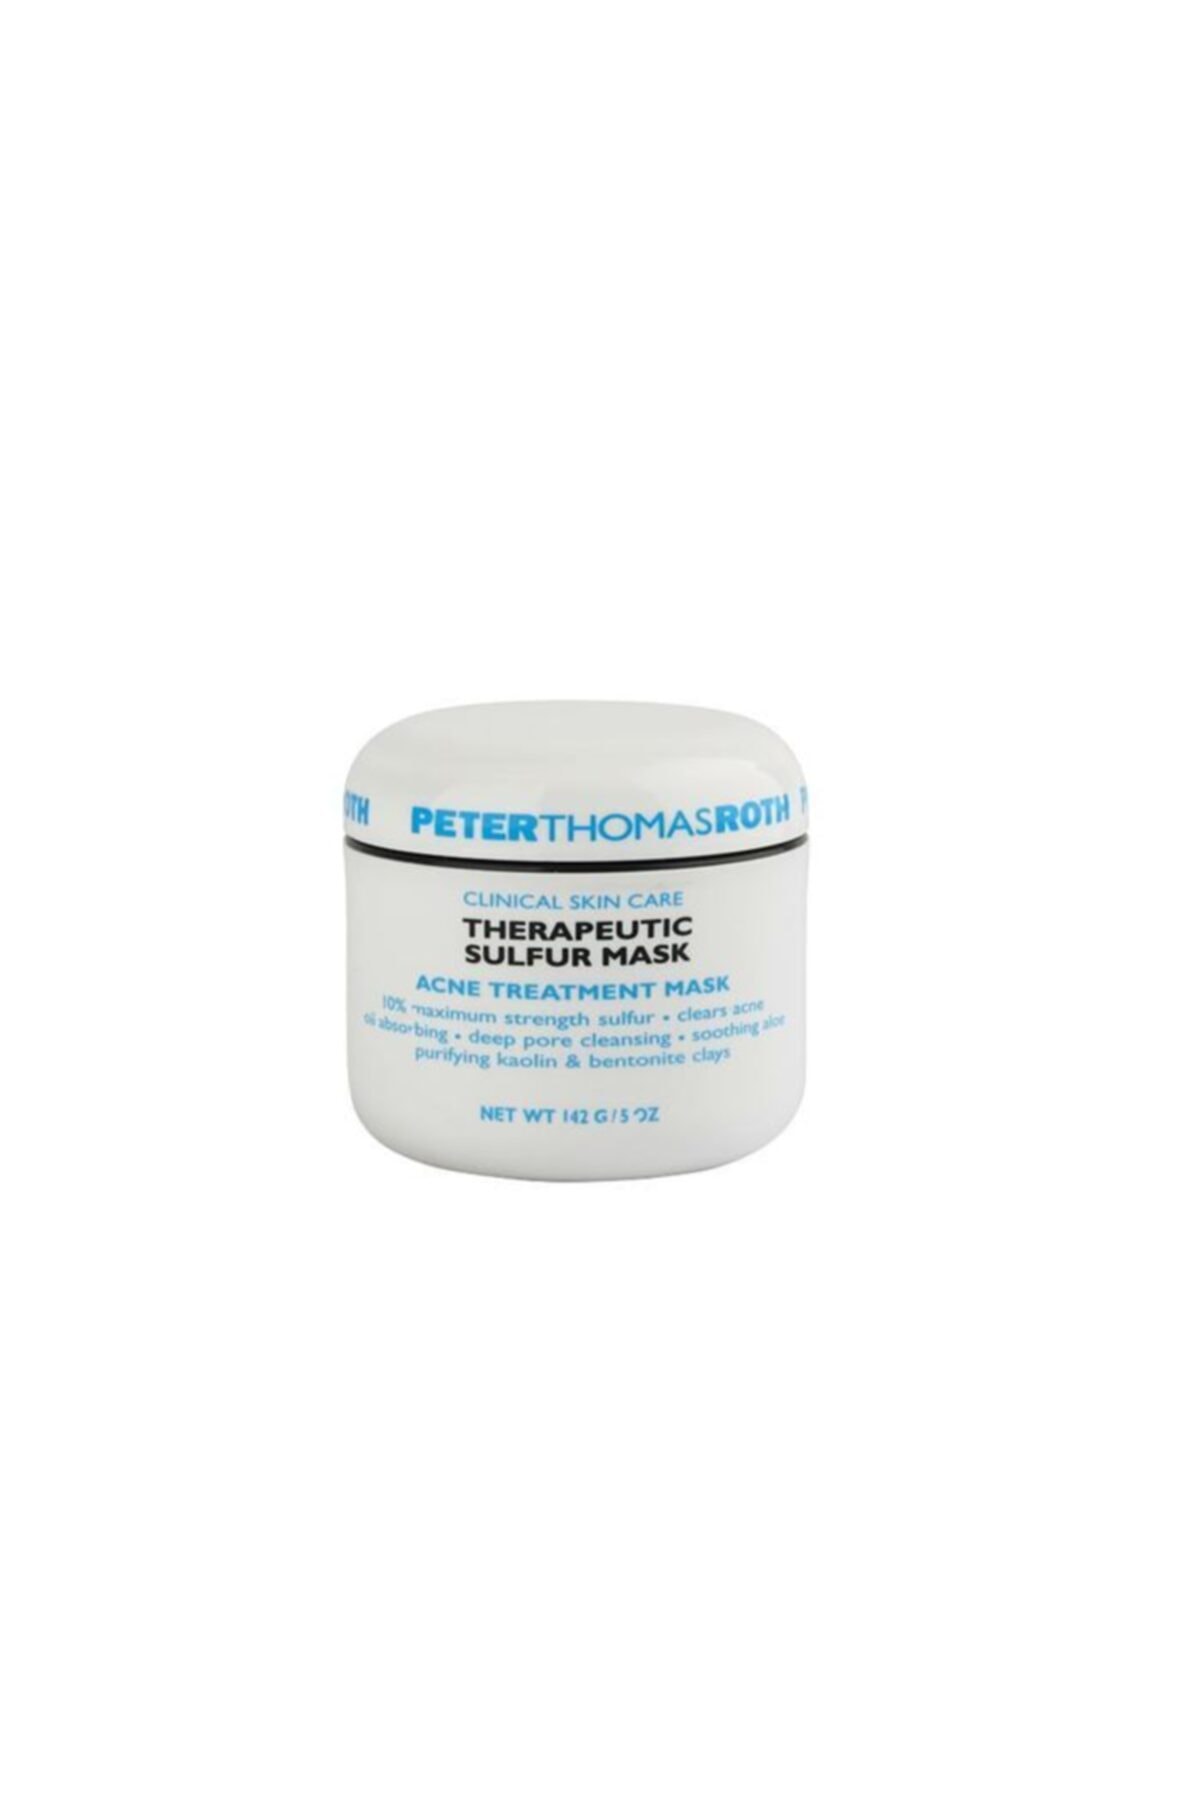 PETER THOMAS ROTH Sulfur Therapautic Masque 142 gr